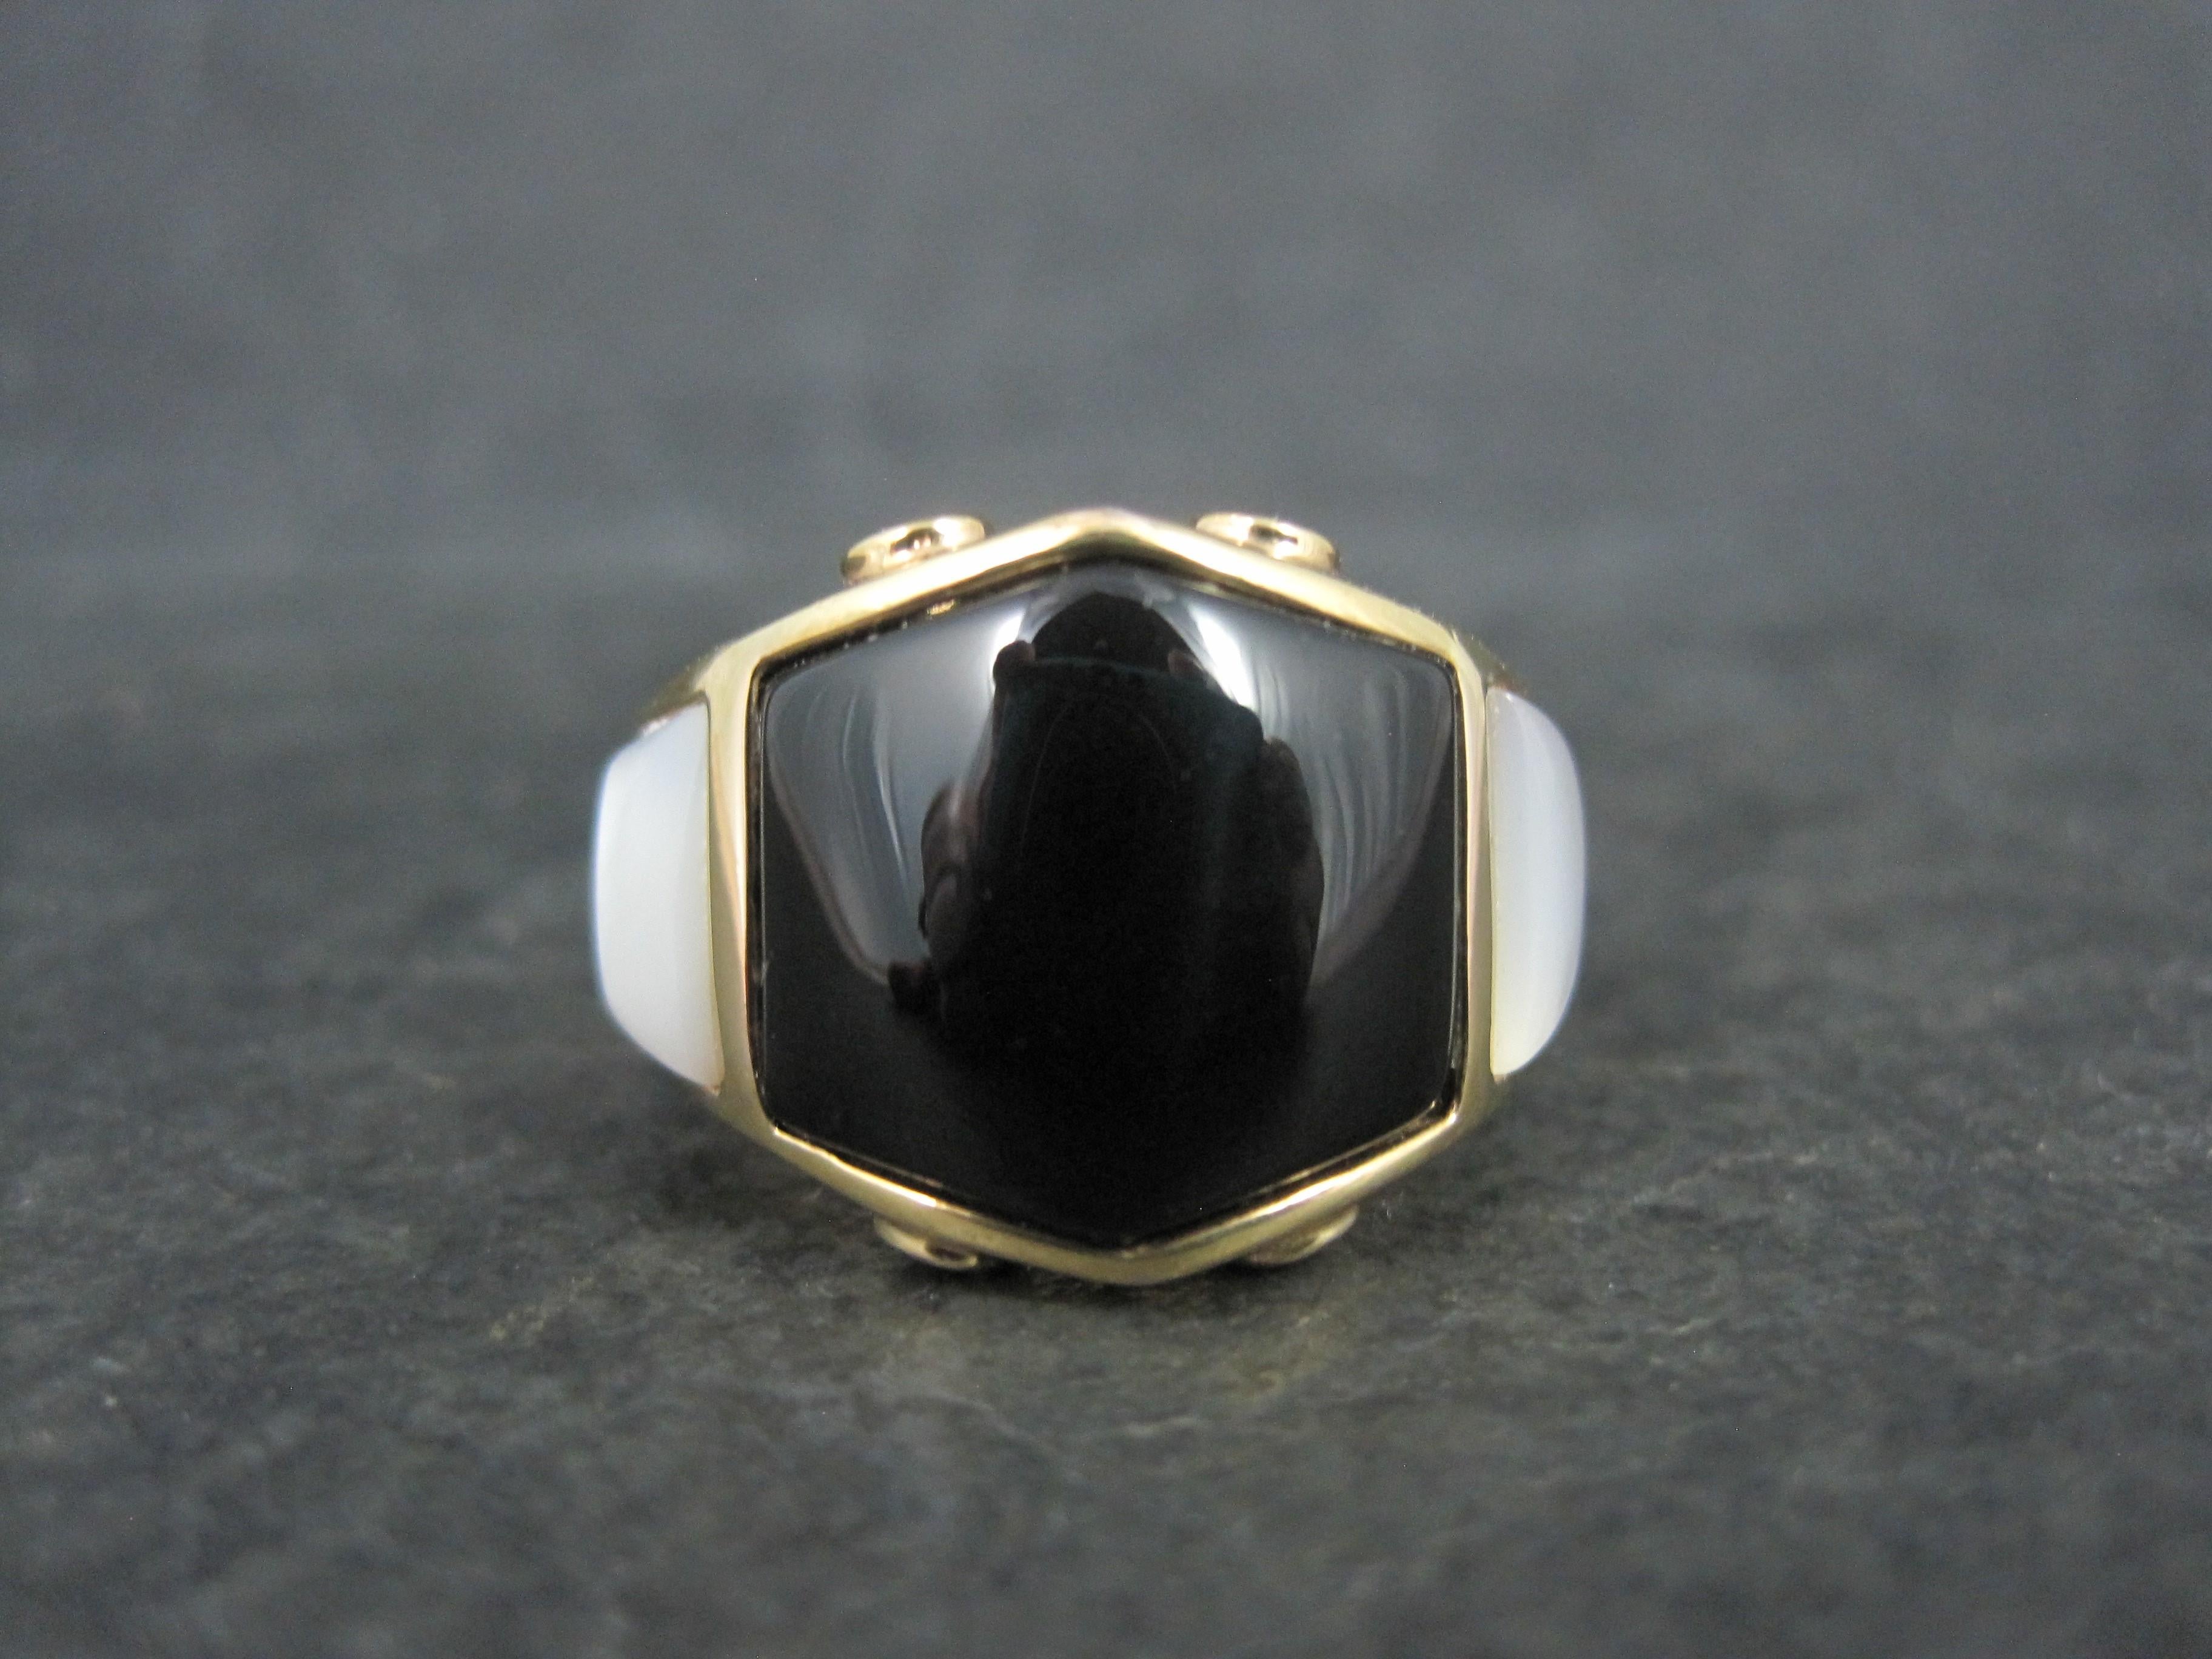 This beautiful estate ring is gold vermeil over sterling silver.
It features inlaid onyx and mother of pearl with cubic zirconia accents.

The face of this ring measures 9/16 of an inch north to south.
Size: 8
Marks: China, 925

Condition: Excellent